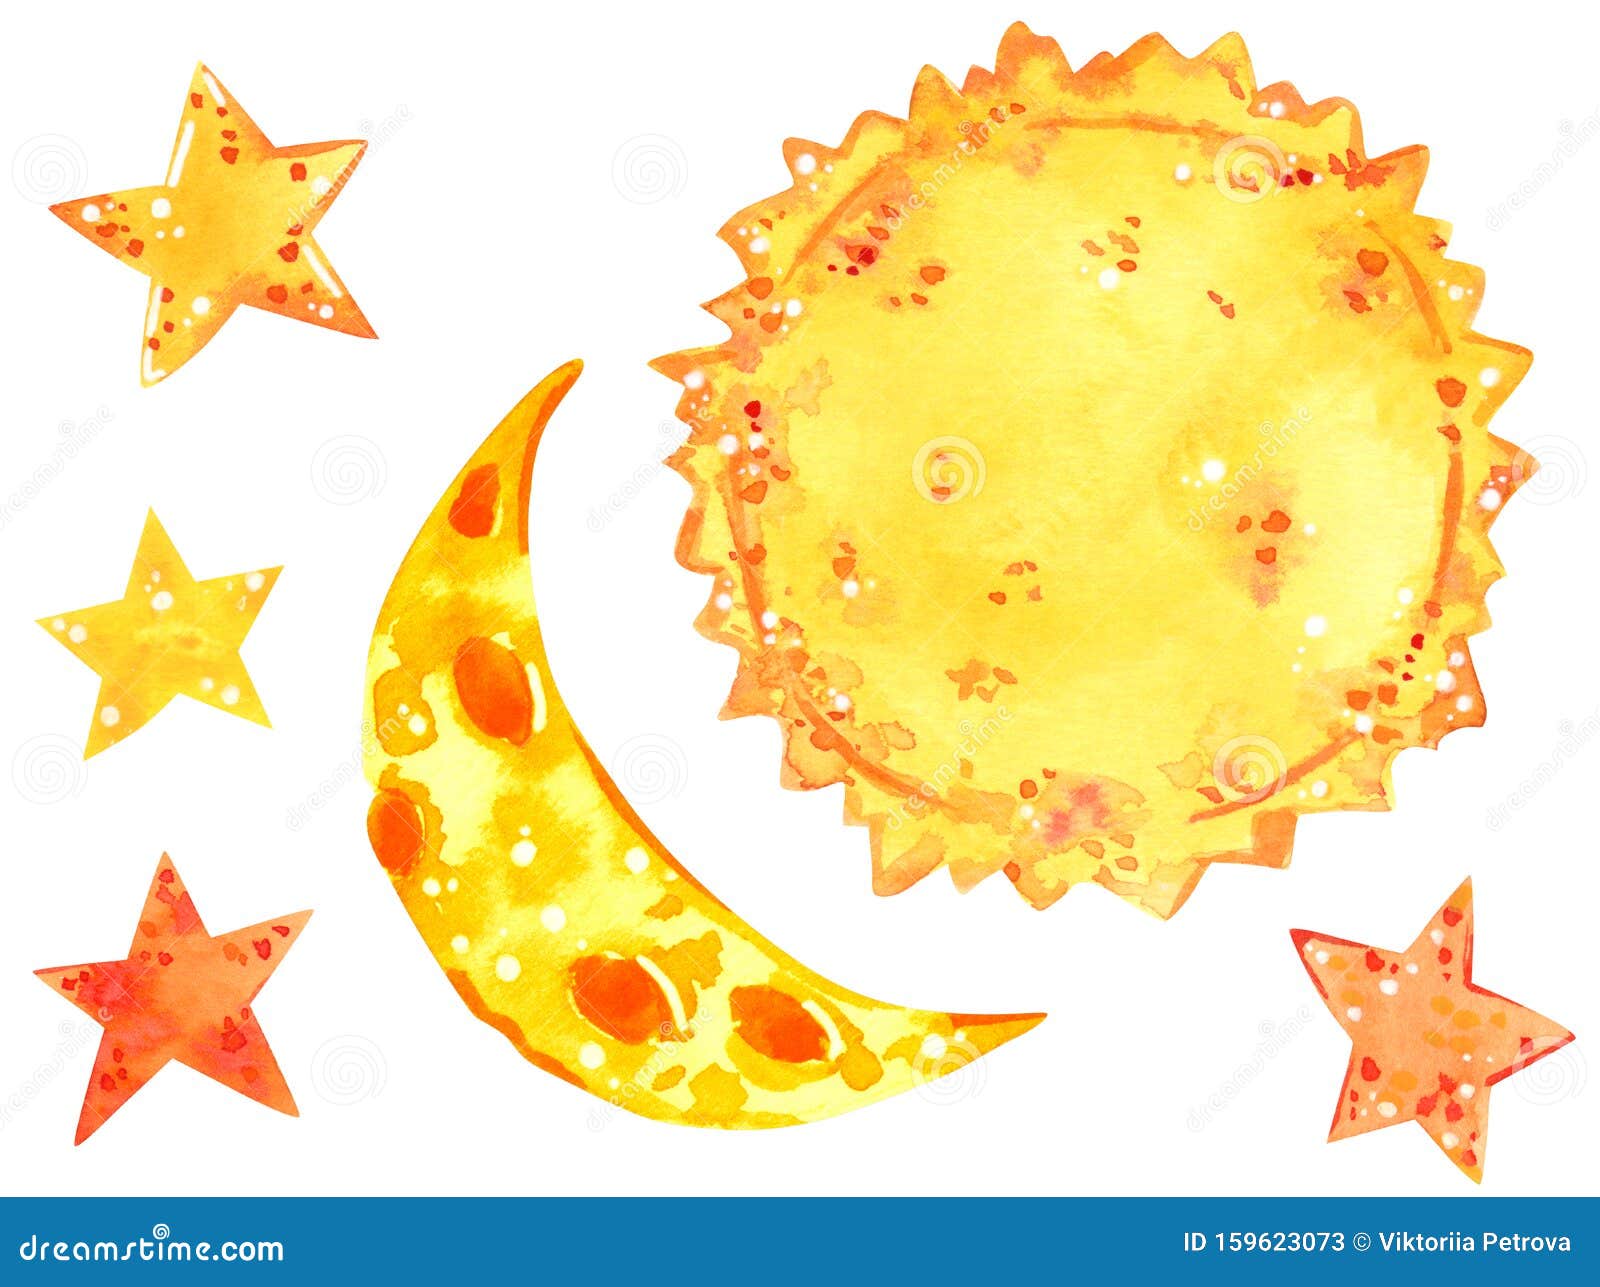 Sun Moon And Stars Weather Clipart Set Hand Drawn Watercolor Illustration Stock Image Image Of Stars Astrology